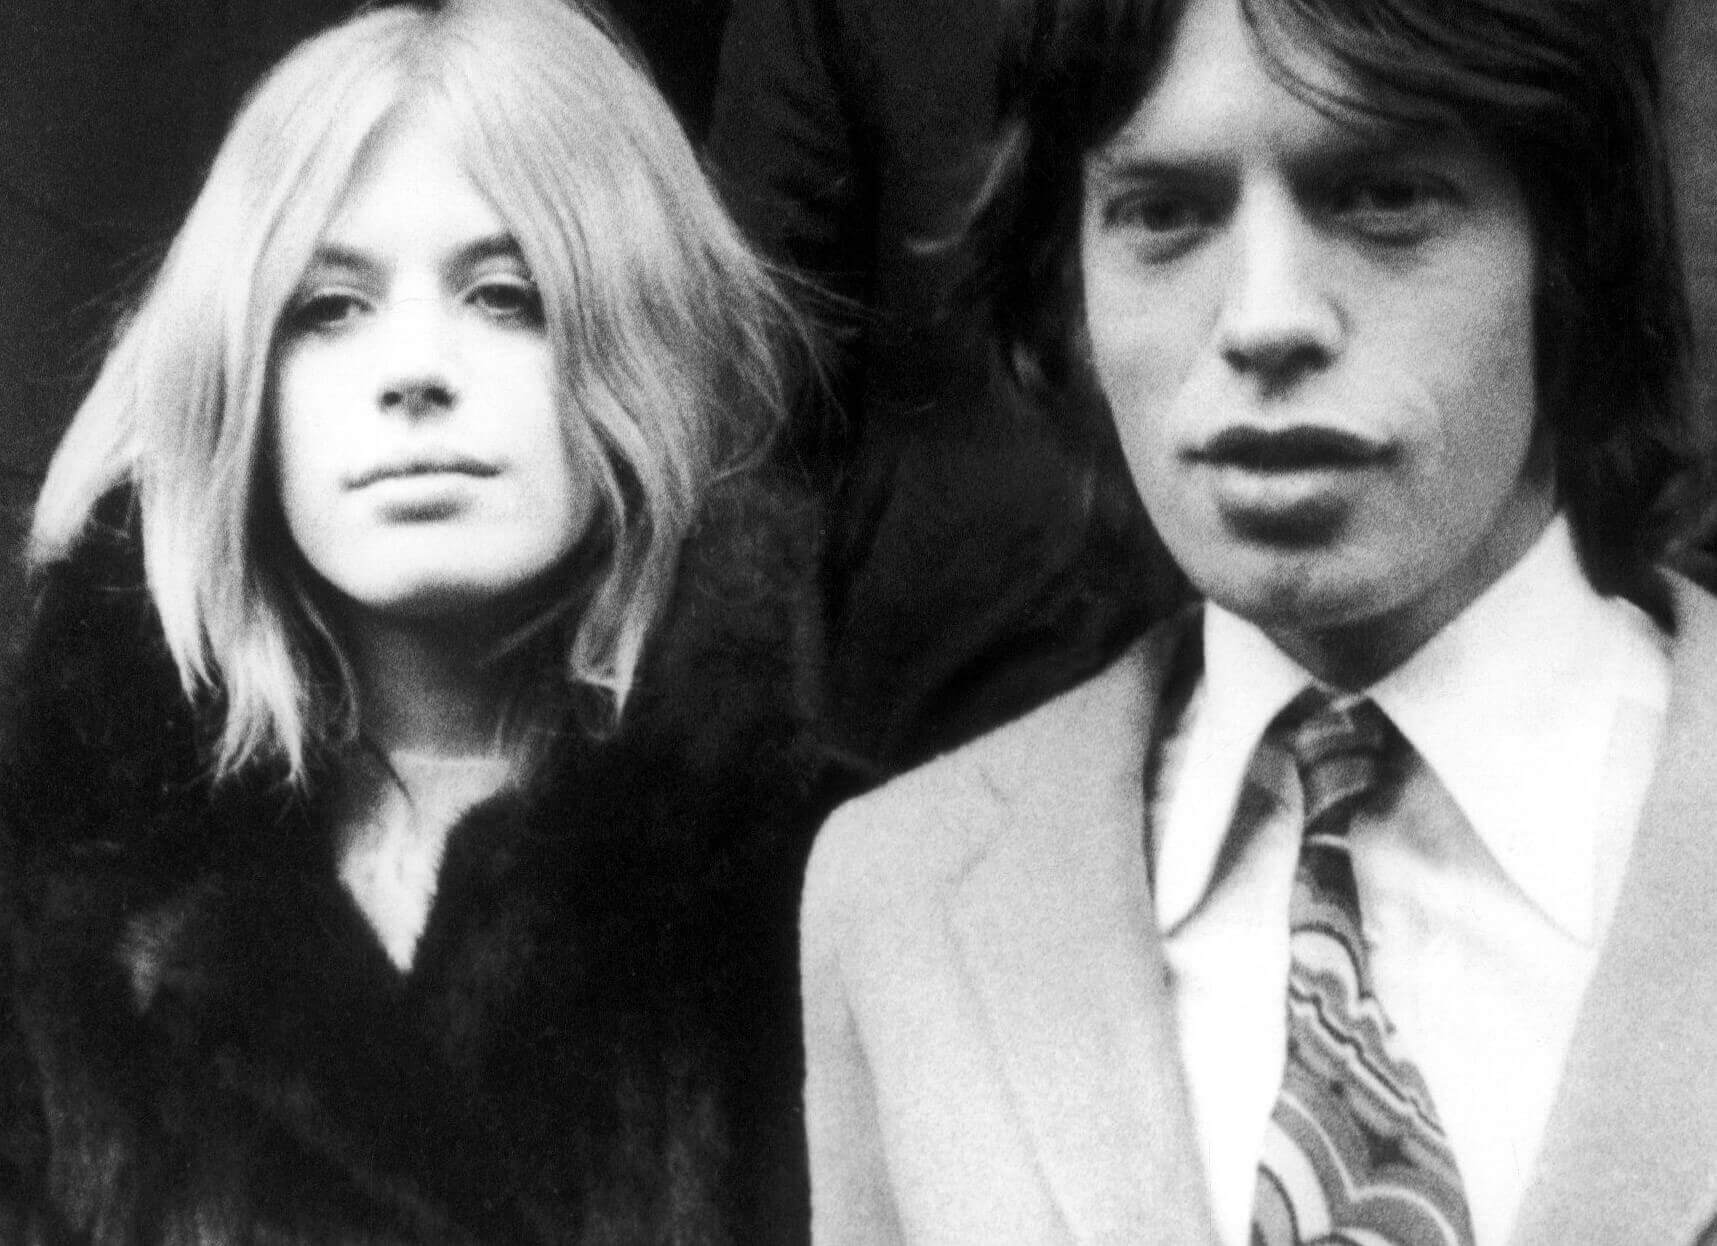 Marianne Faithfull with The Rolling Stones' Mick Jagger